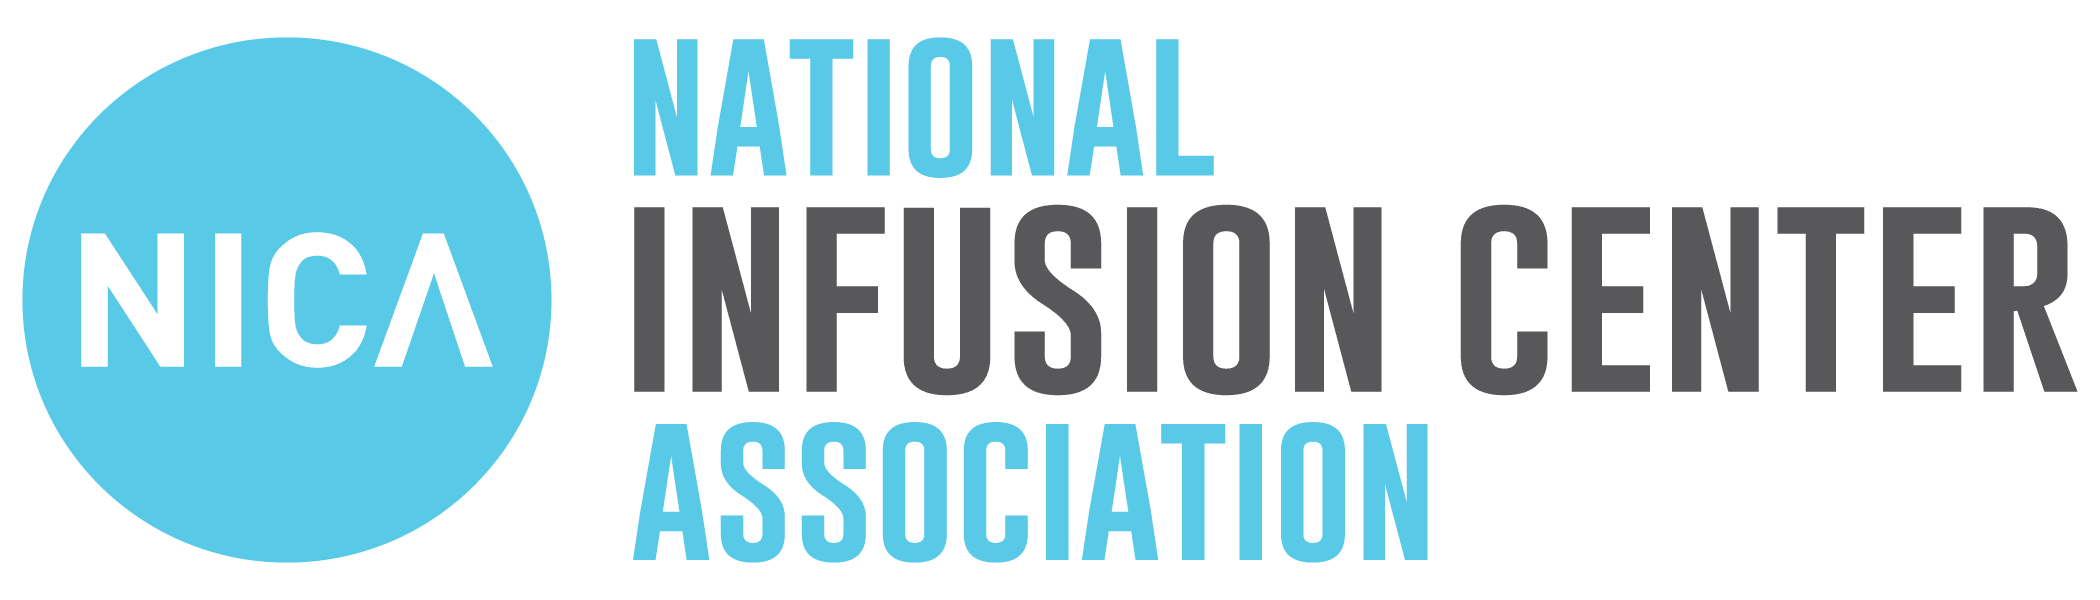 National Infusion Center Association (NICA)